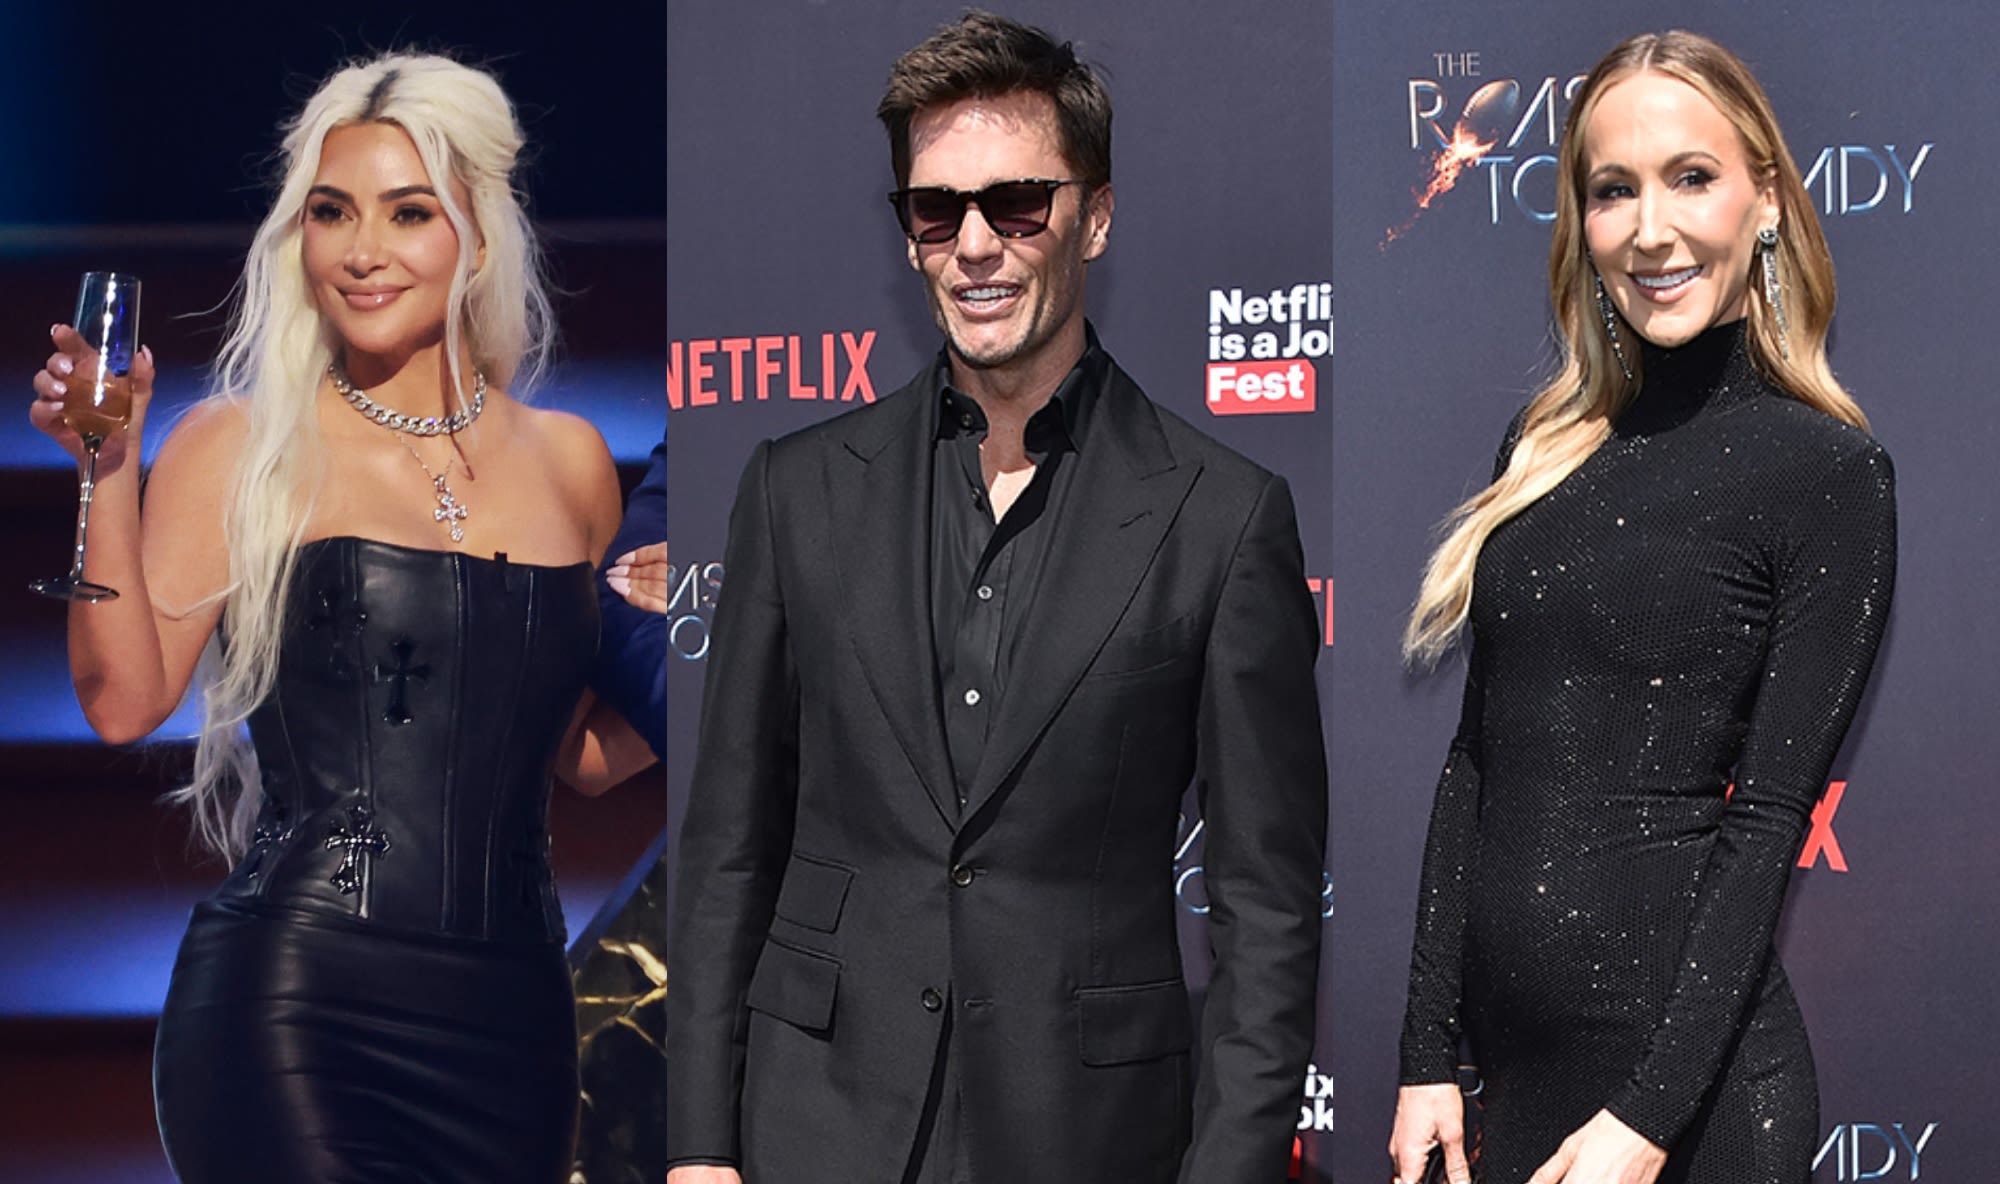 Kim Kardashian Embraces the Corset Look, Nikki Glaser Sparkles and More Celebrity Style at Tom Brady’s ‘Greatest Roast of All Time...